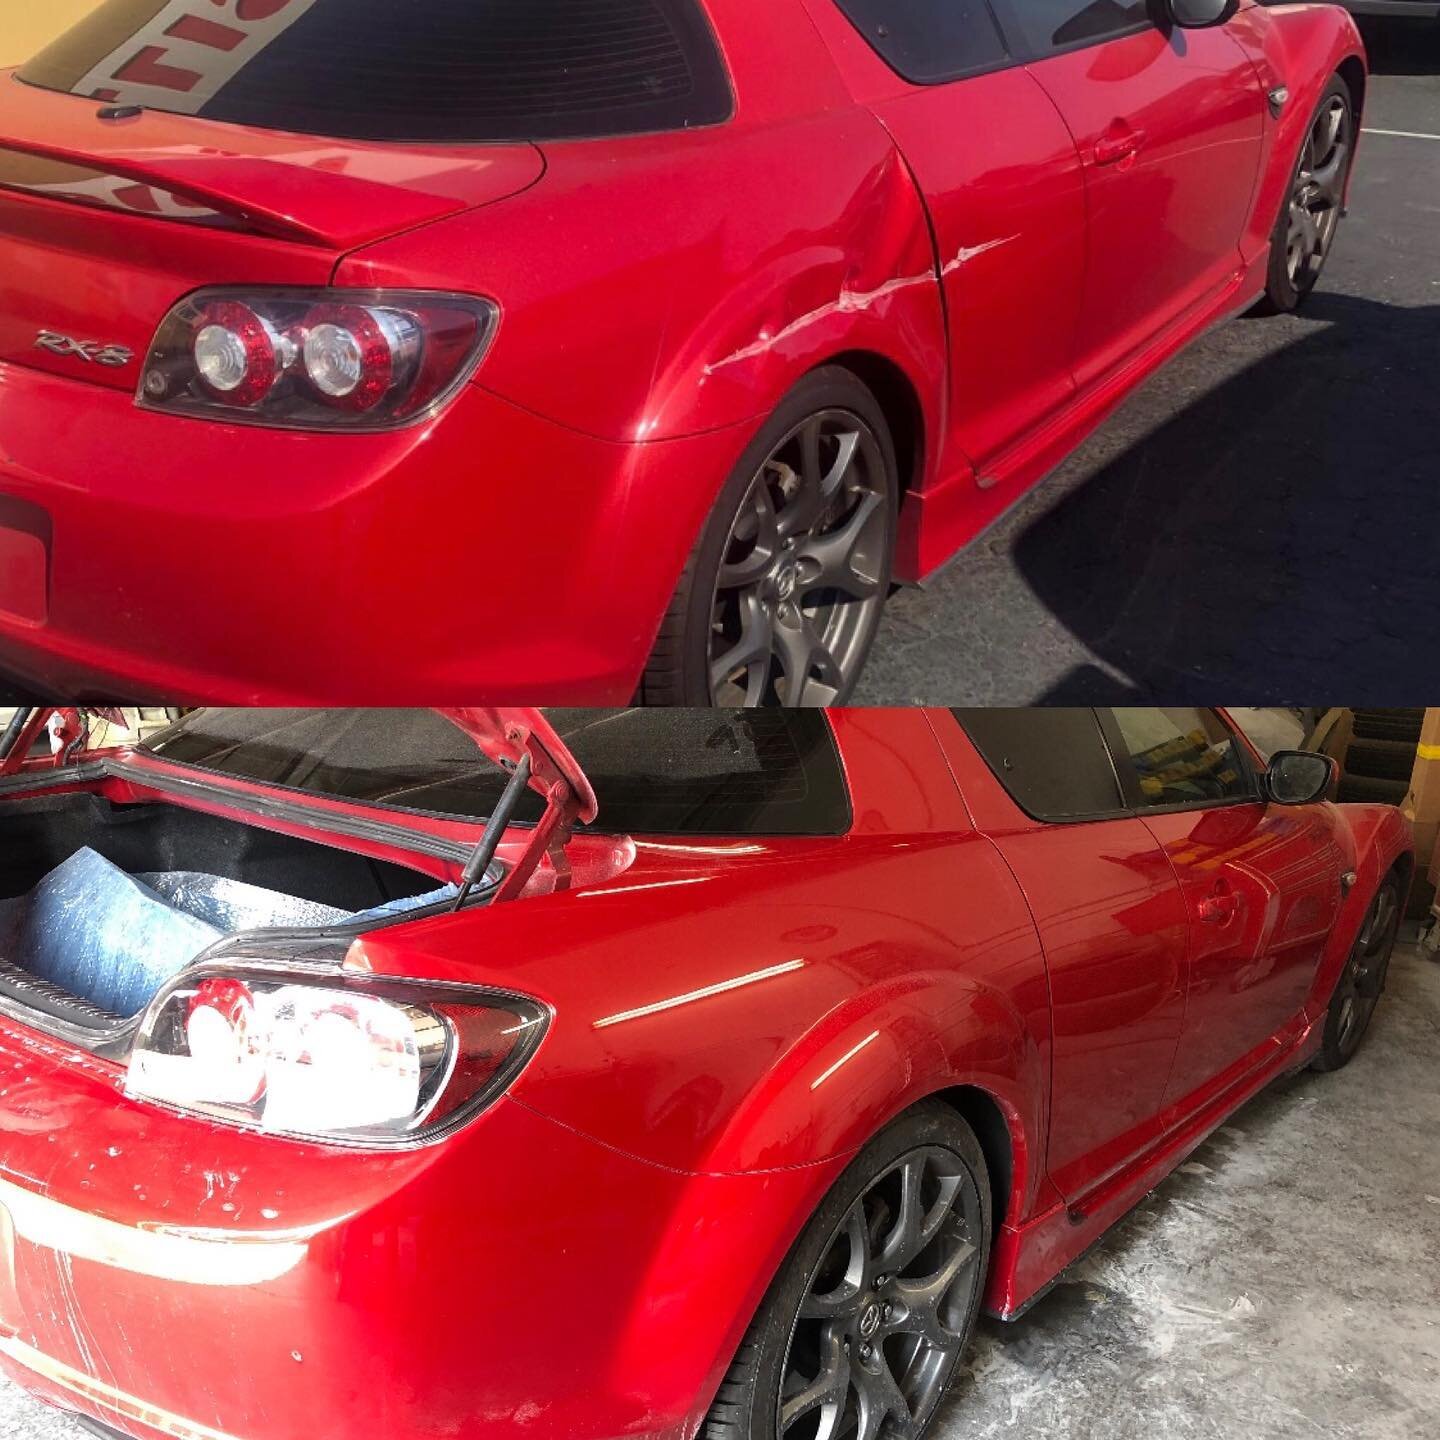 We handle insurance and out-of-pocket repair. This #Mazda #Rx8 needed a little loving #ThosAutoCollision #ThosAuto